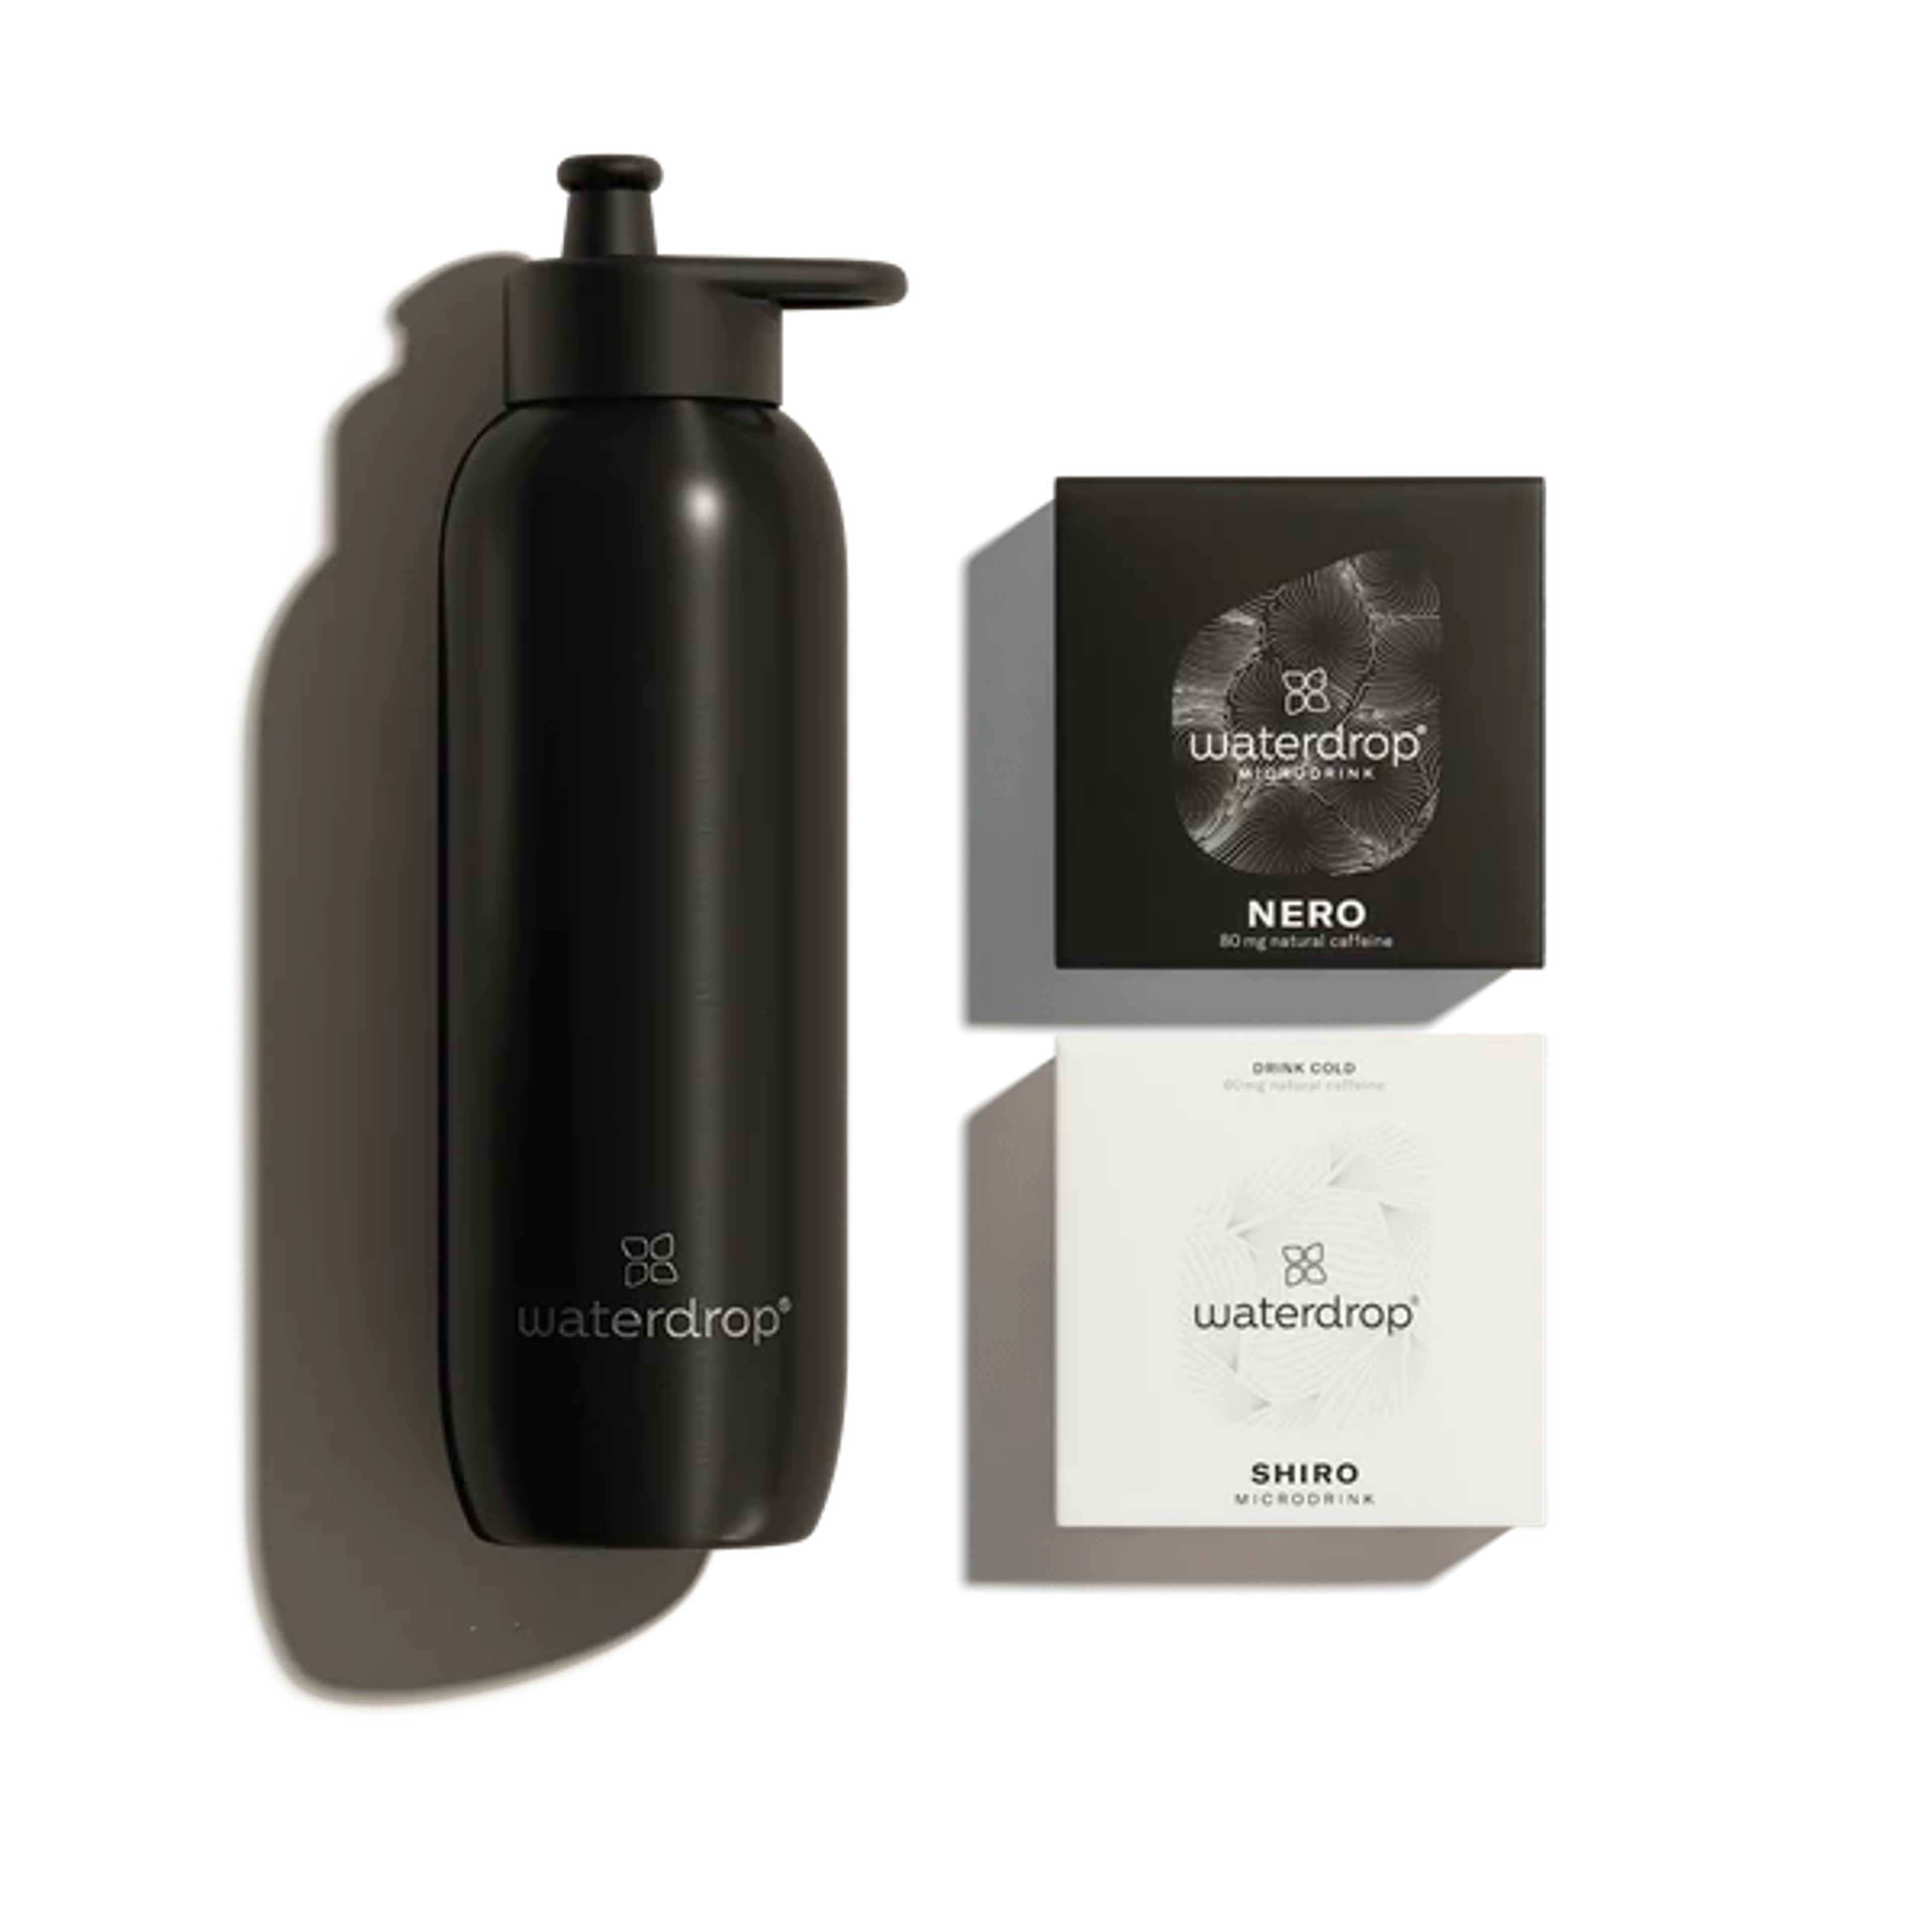 Exclusive Energy Set including Sports Bottle | waterdrop®